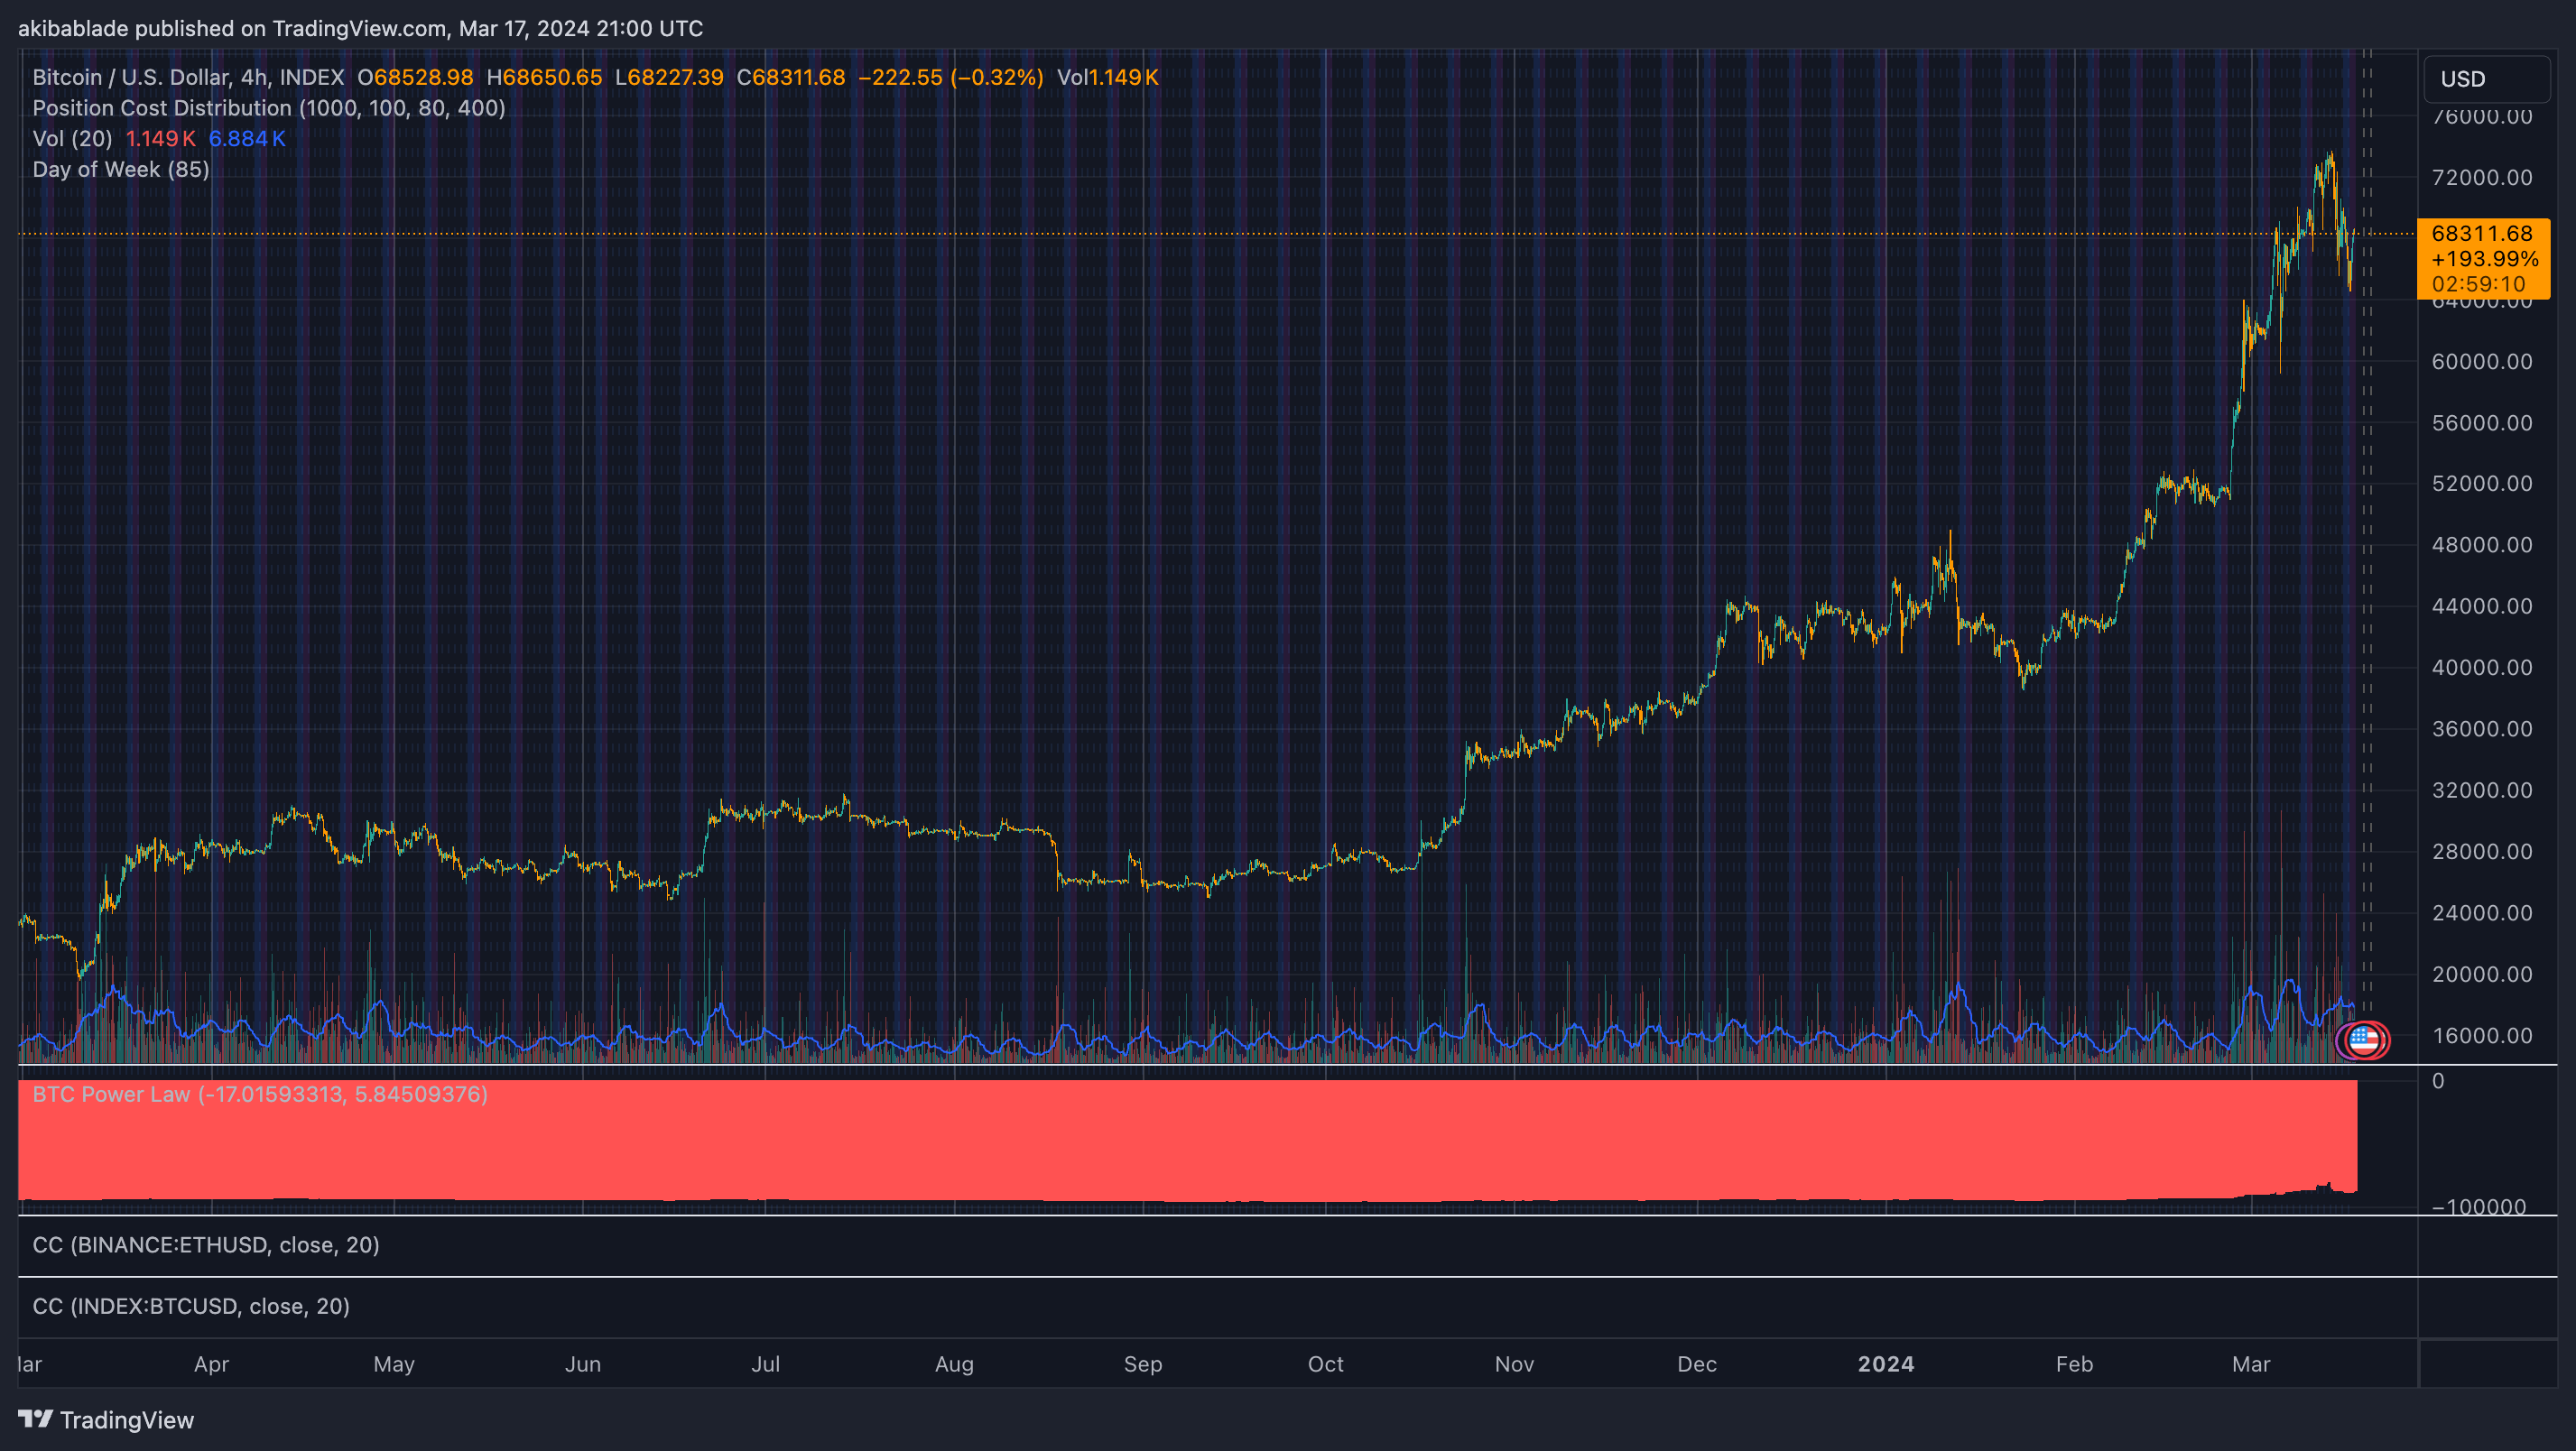 Bitcoin weekend trading in 2023 (Source: TradingView)